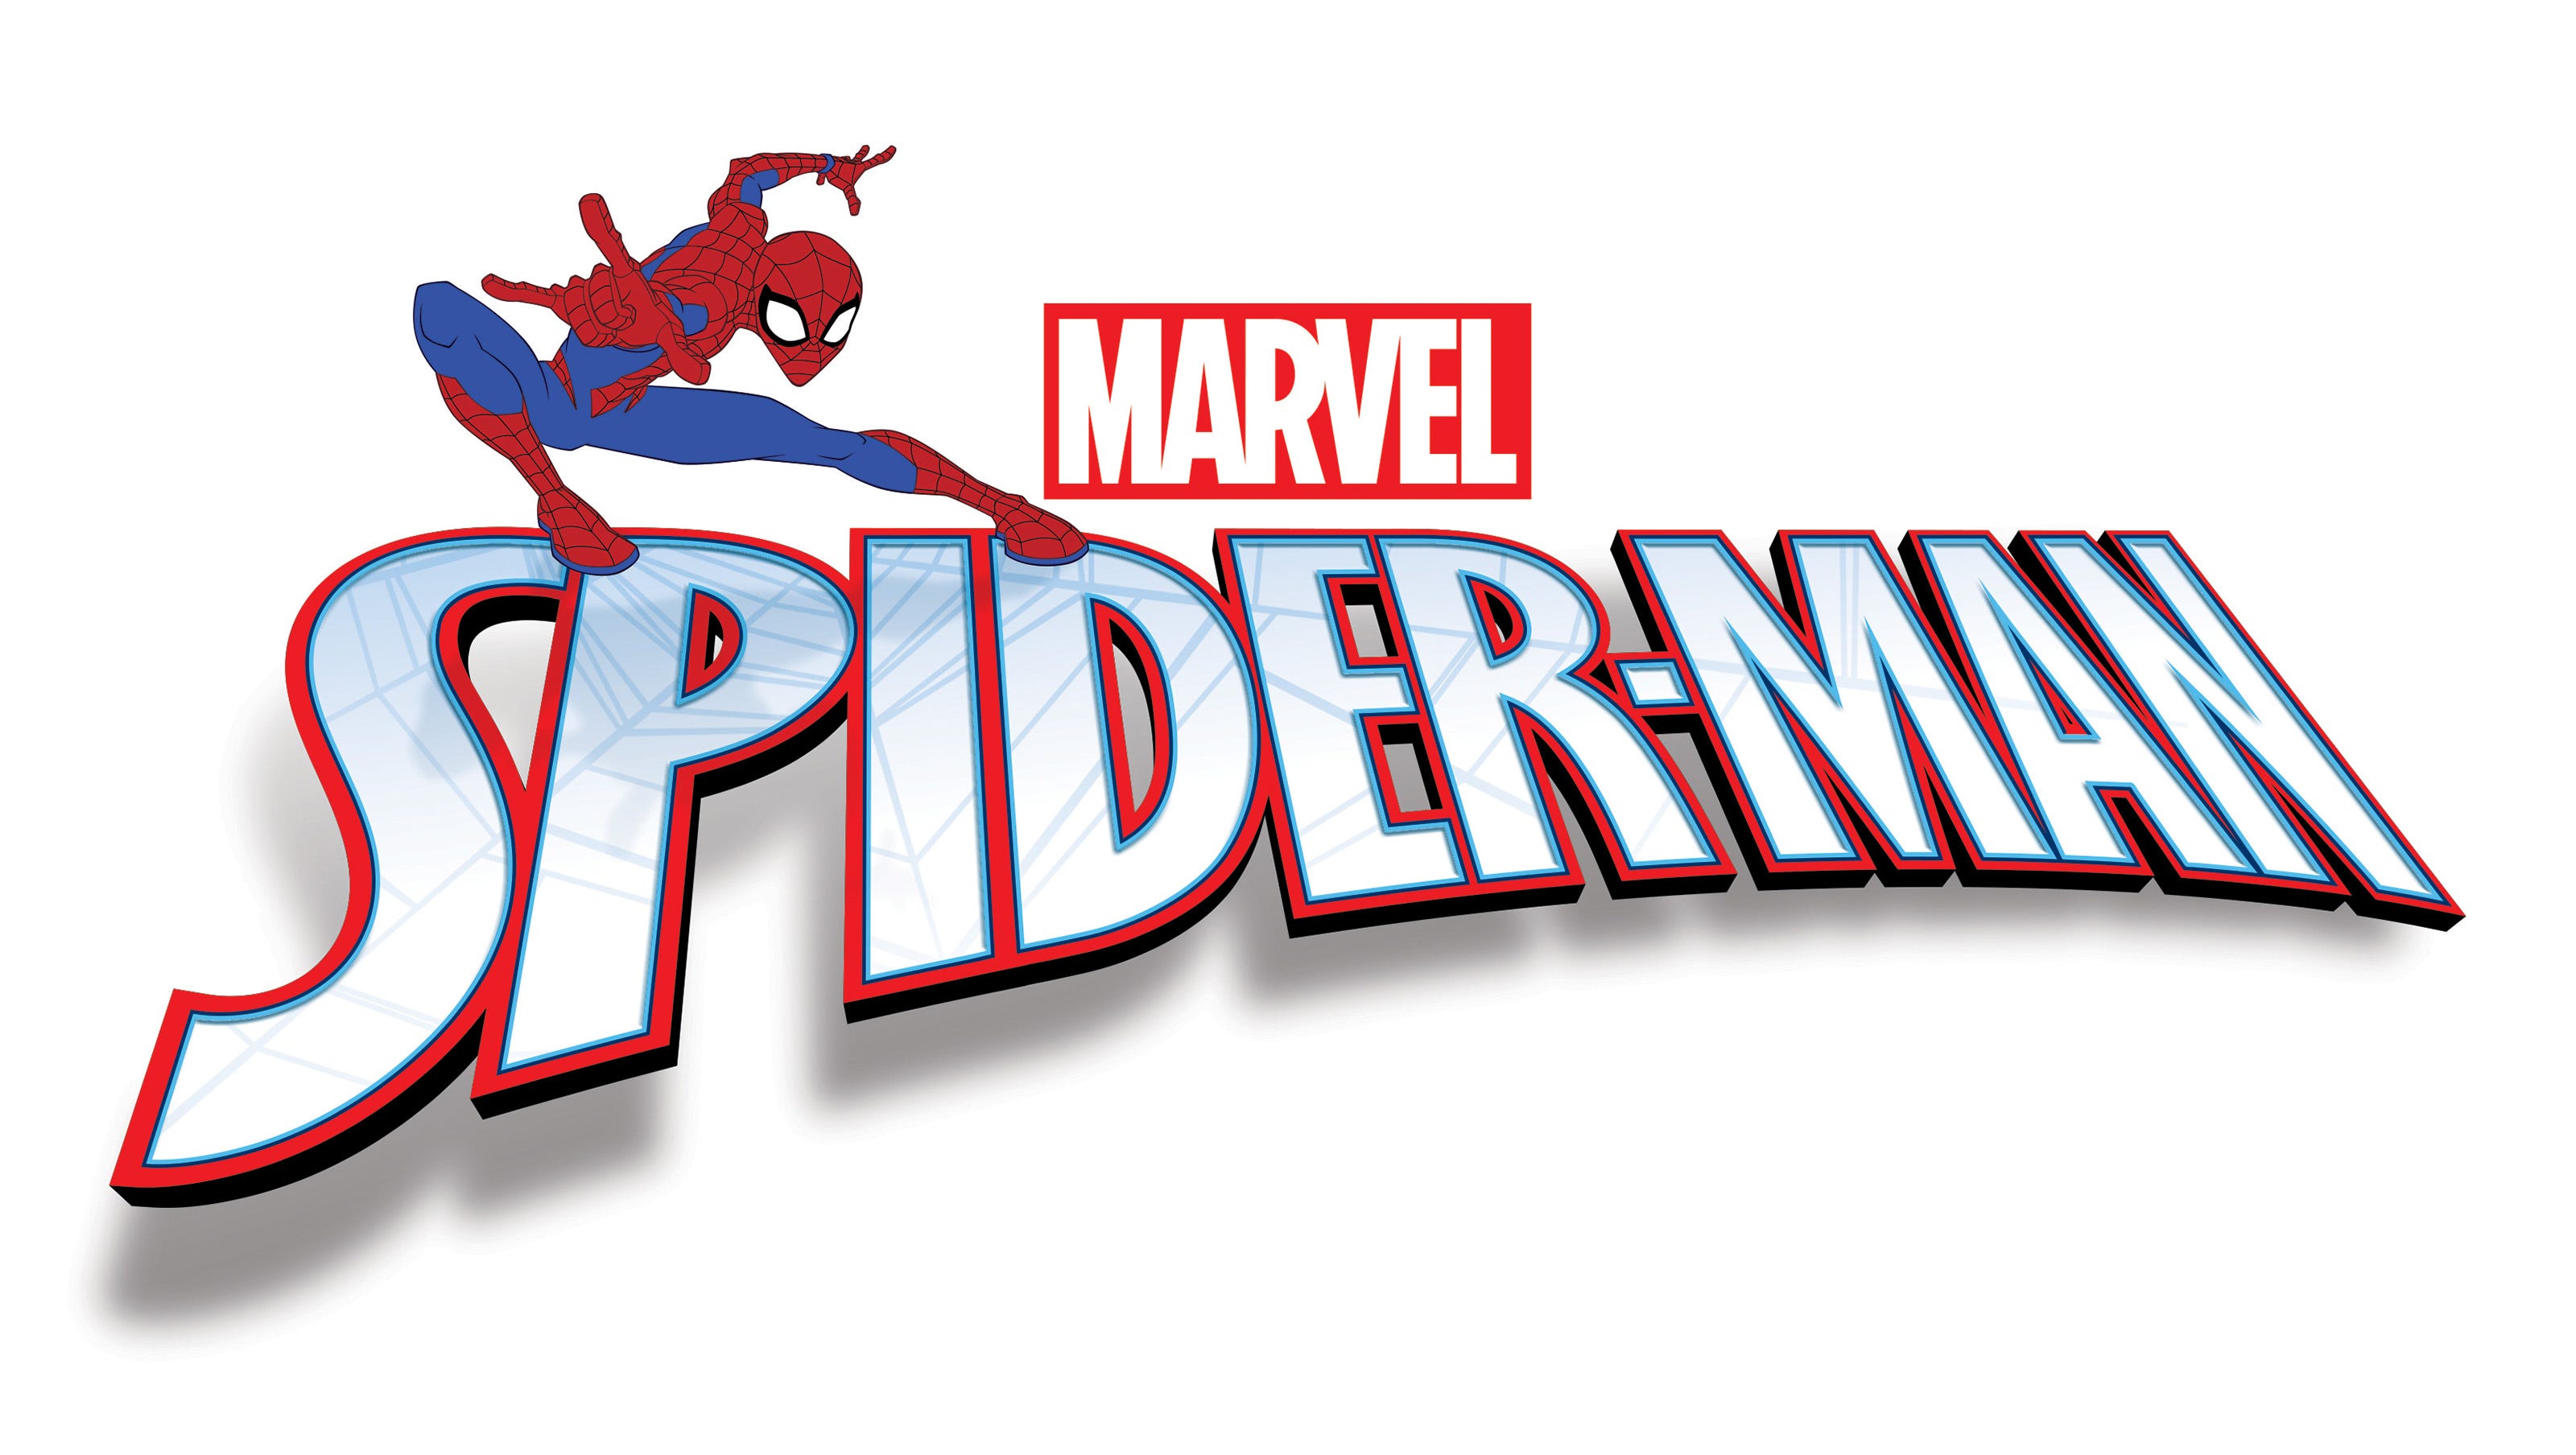 Exclusive: New 'Spider-Man' animated series coming in 2017